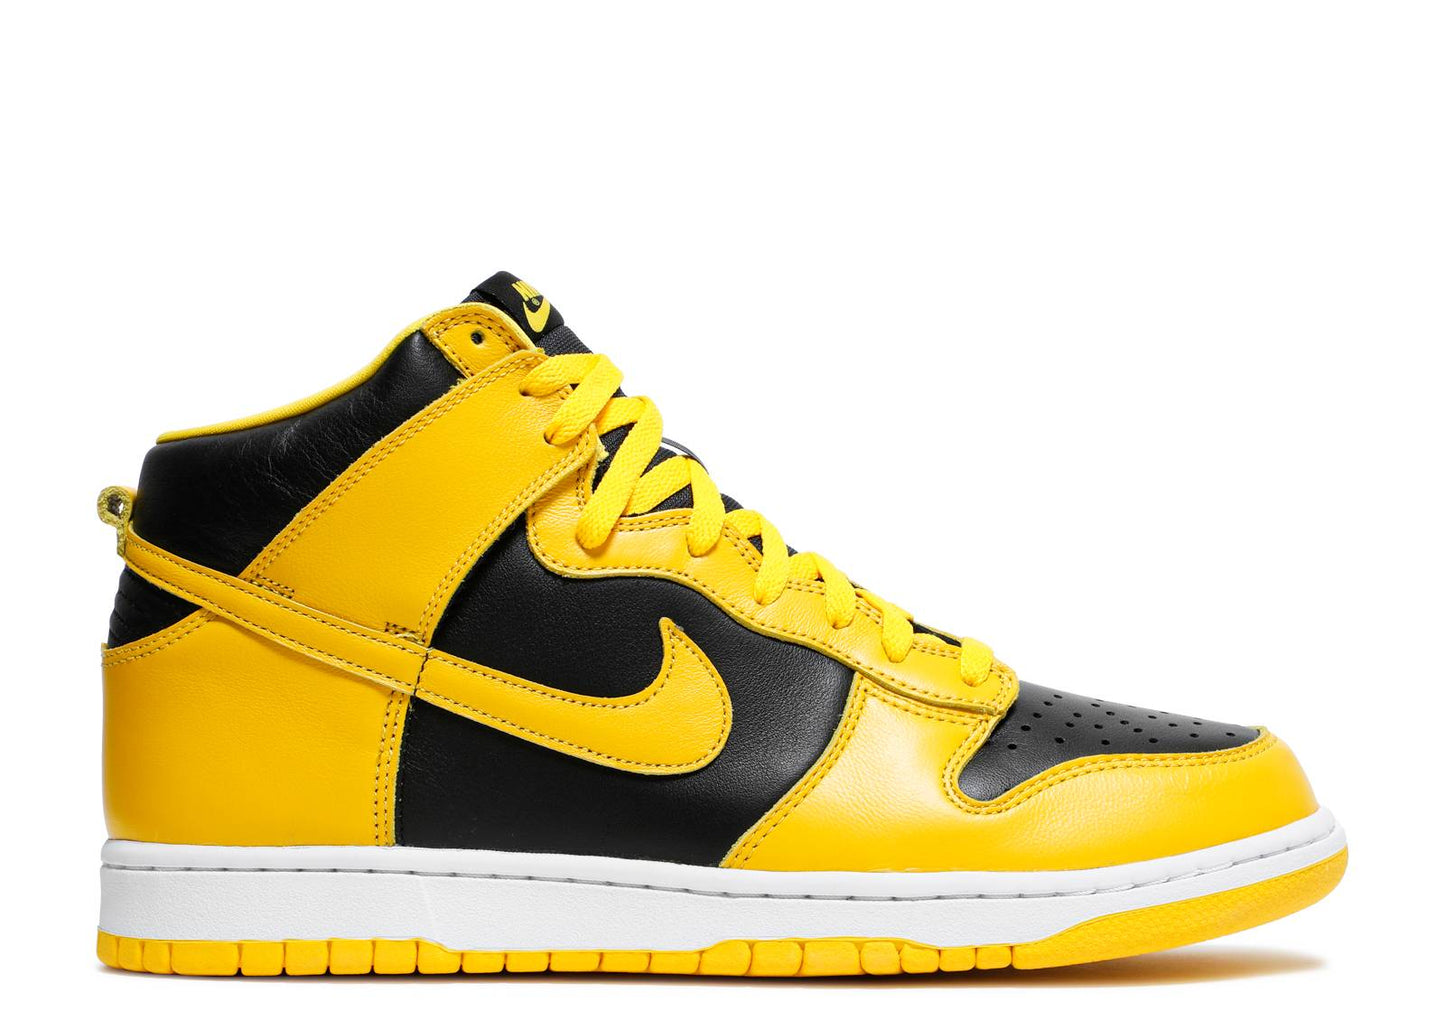 Nike Dunk High Varsity Maize (Pre-Owned)